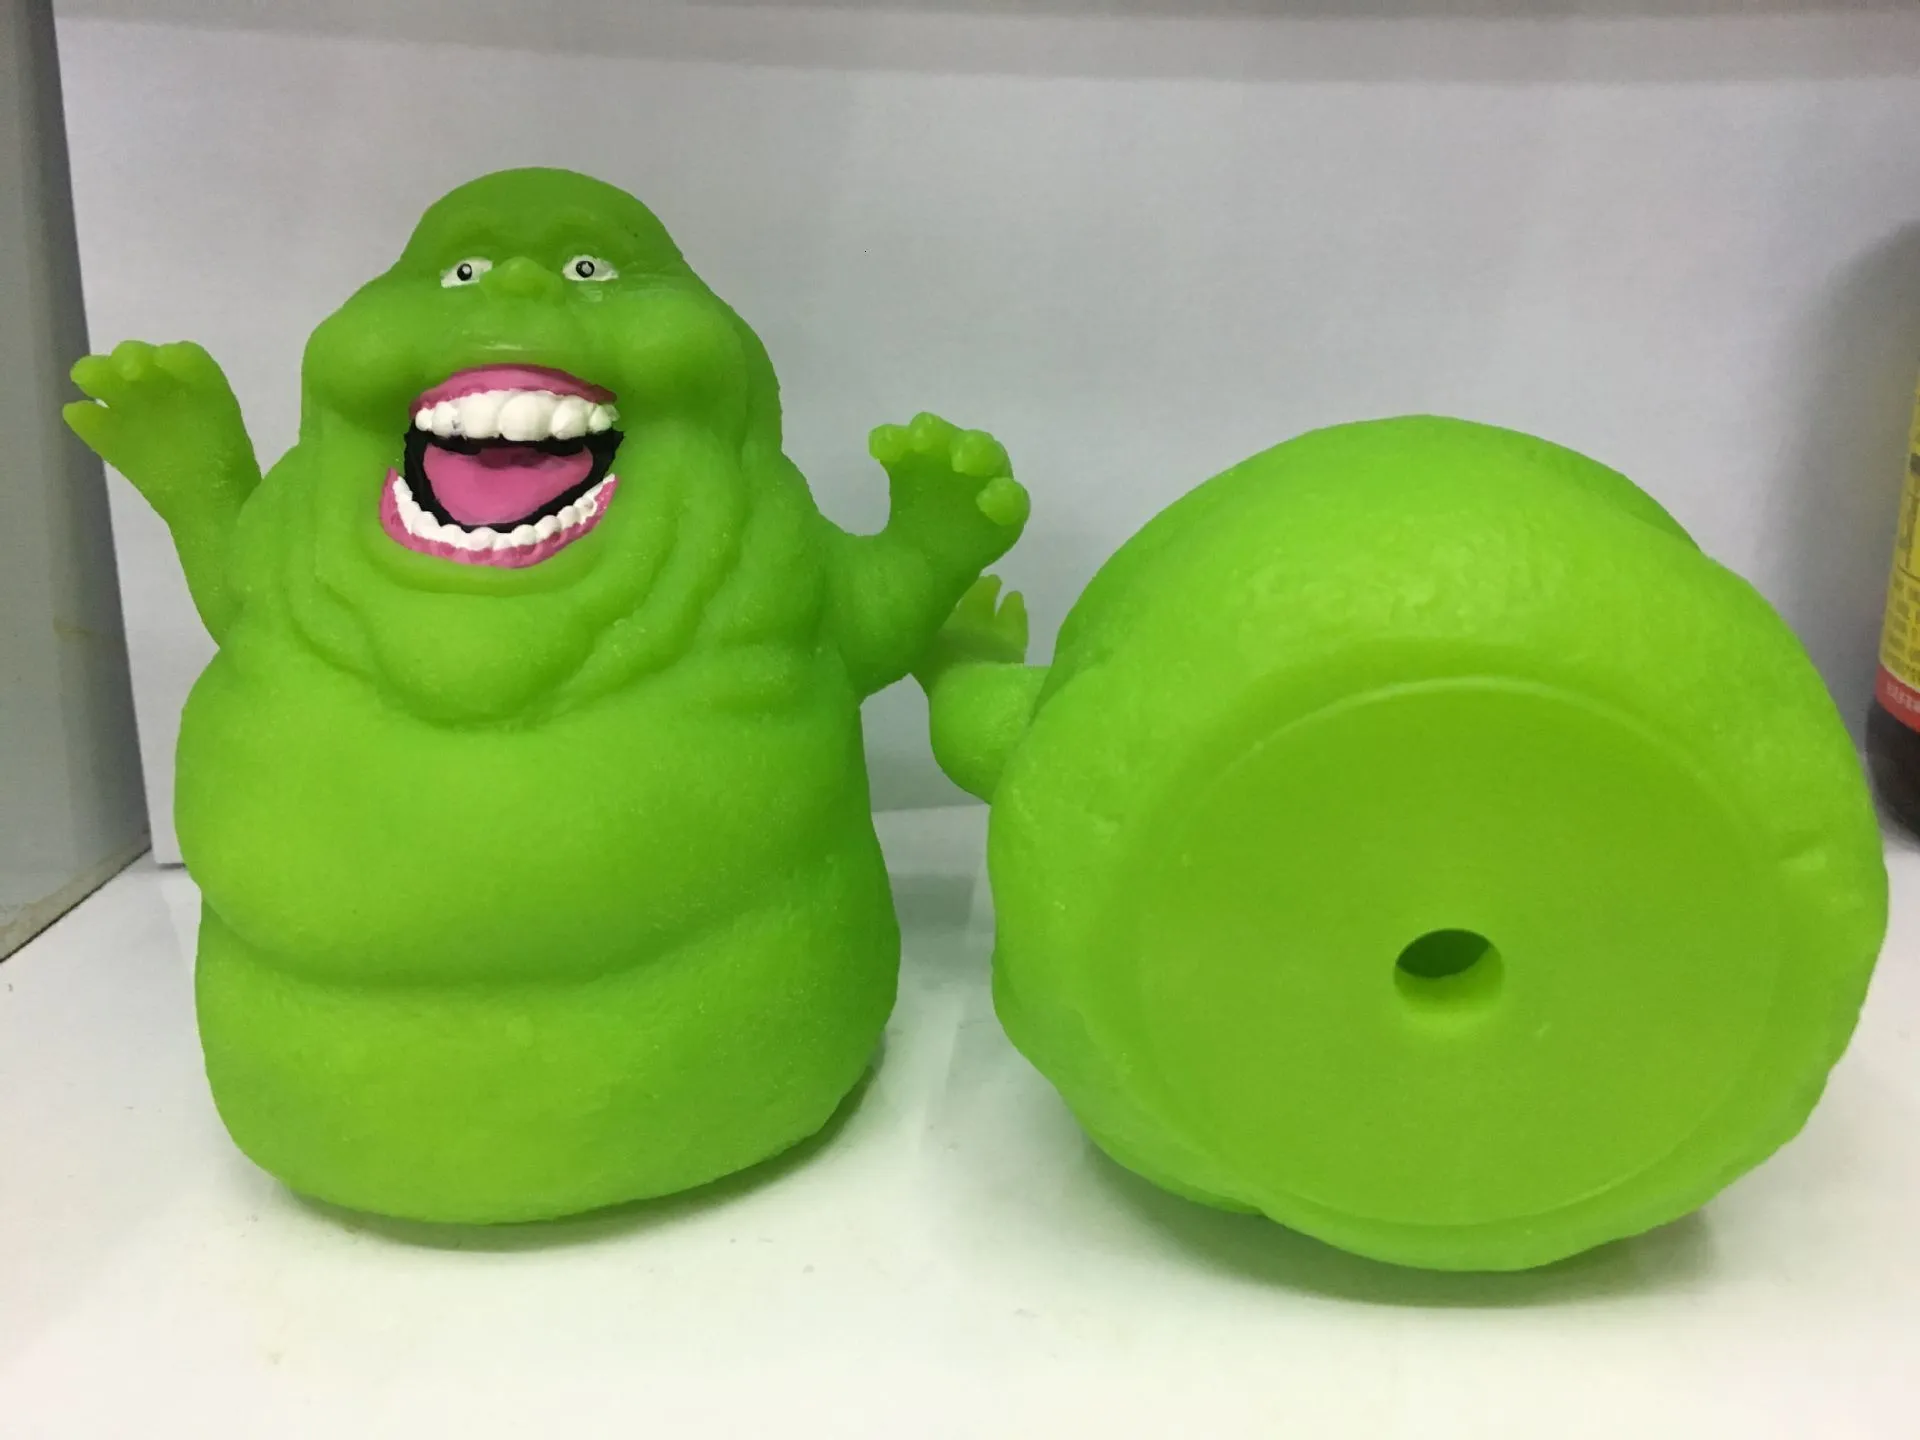 set Cartoon Anime Ghostbusters Green Ghost Slimer Action Figure Doll Pvc Action Figures Model BB Knock Toys for Kids T202841563